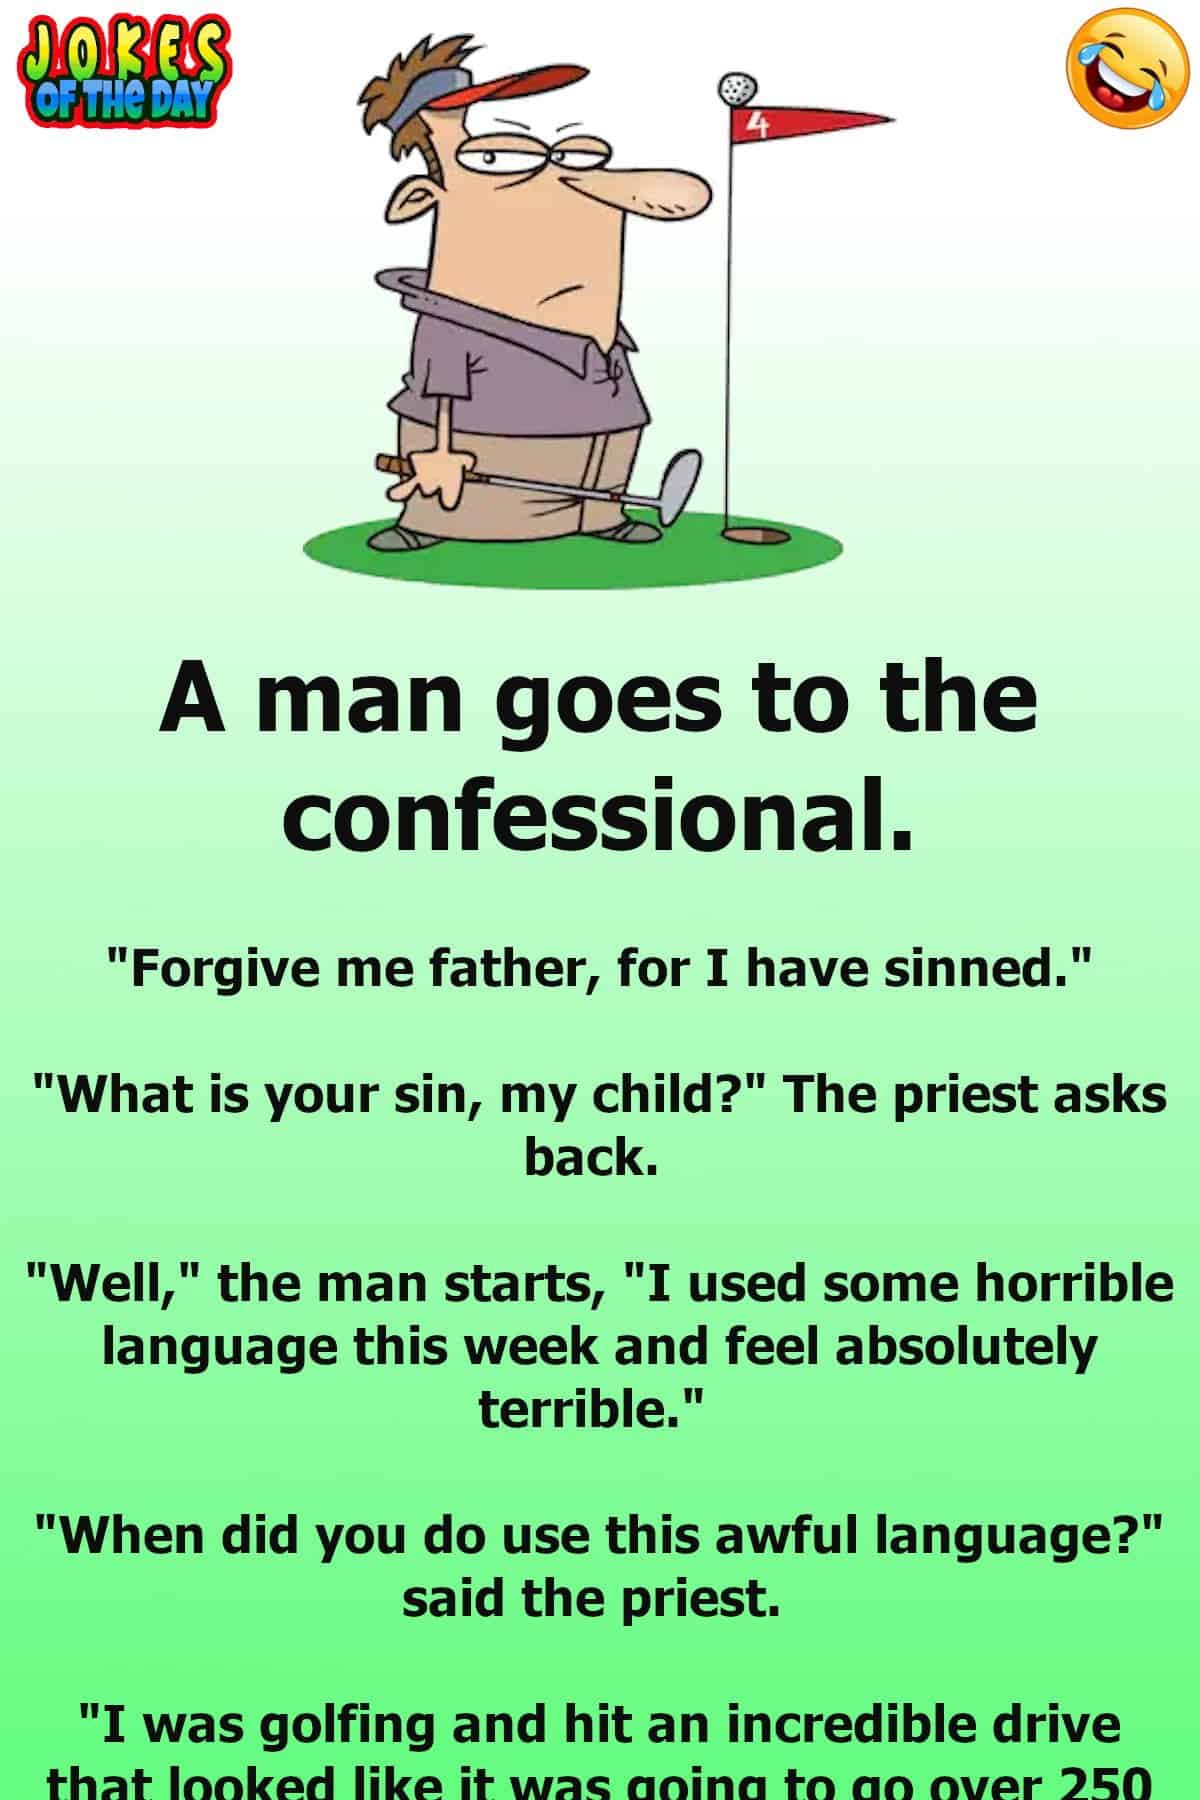 Golfing Joke - Forgive me father for I have sinned